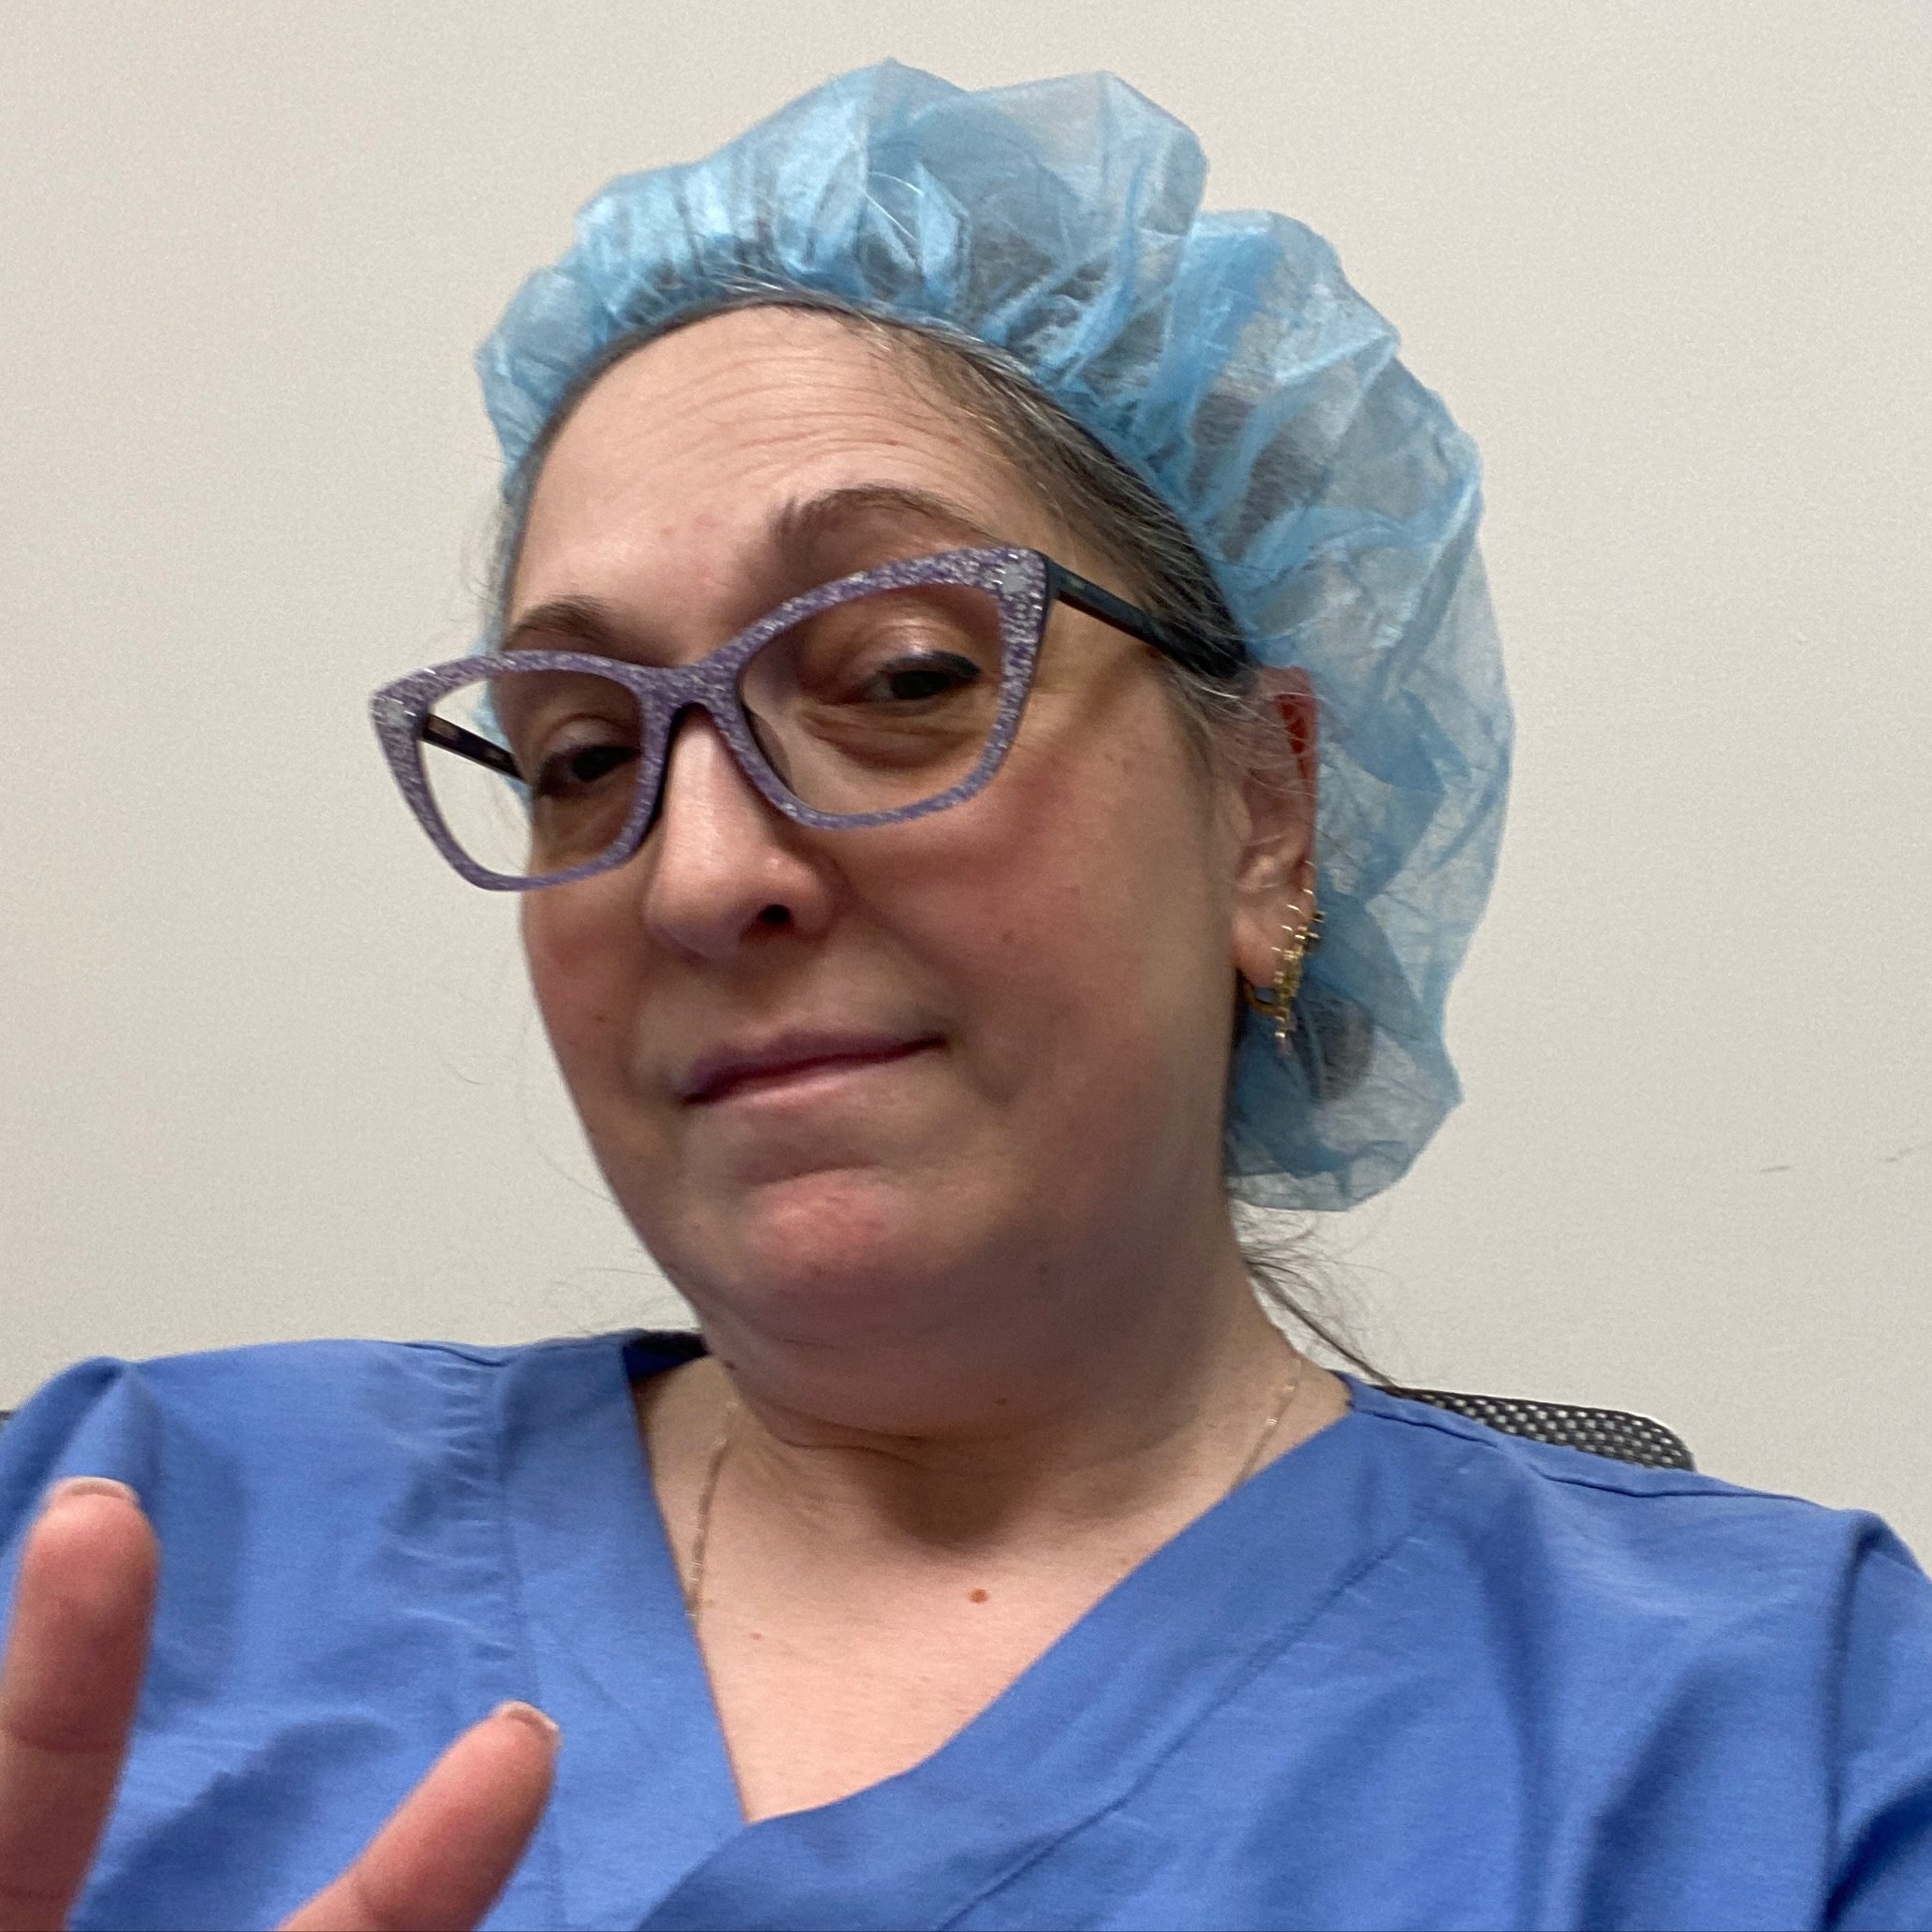 I don&rsquo;t usually wear scrubs but when I do, I&rsquo;m trying to get someone pregnant. 

If you know me you know I don&rsquo;t wear scrubs in my own office, and I wear all black - so when I&rsquo;m wearing scrubs, it&rsquo;s because I&rsquo;m try